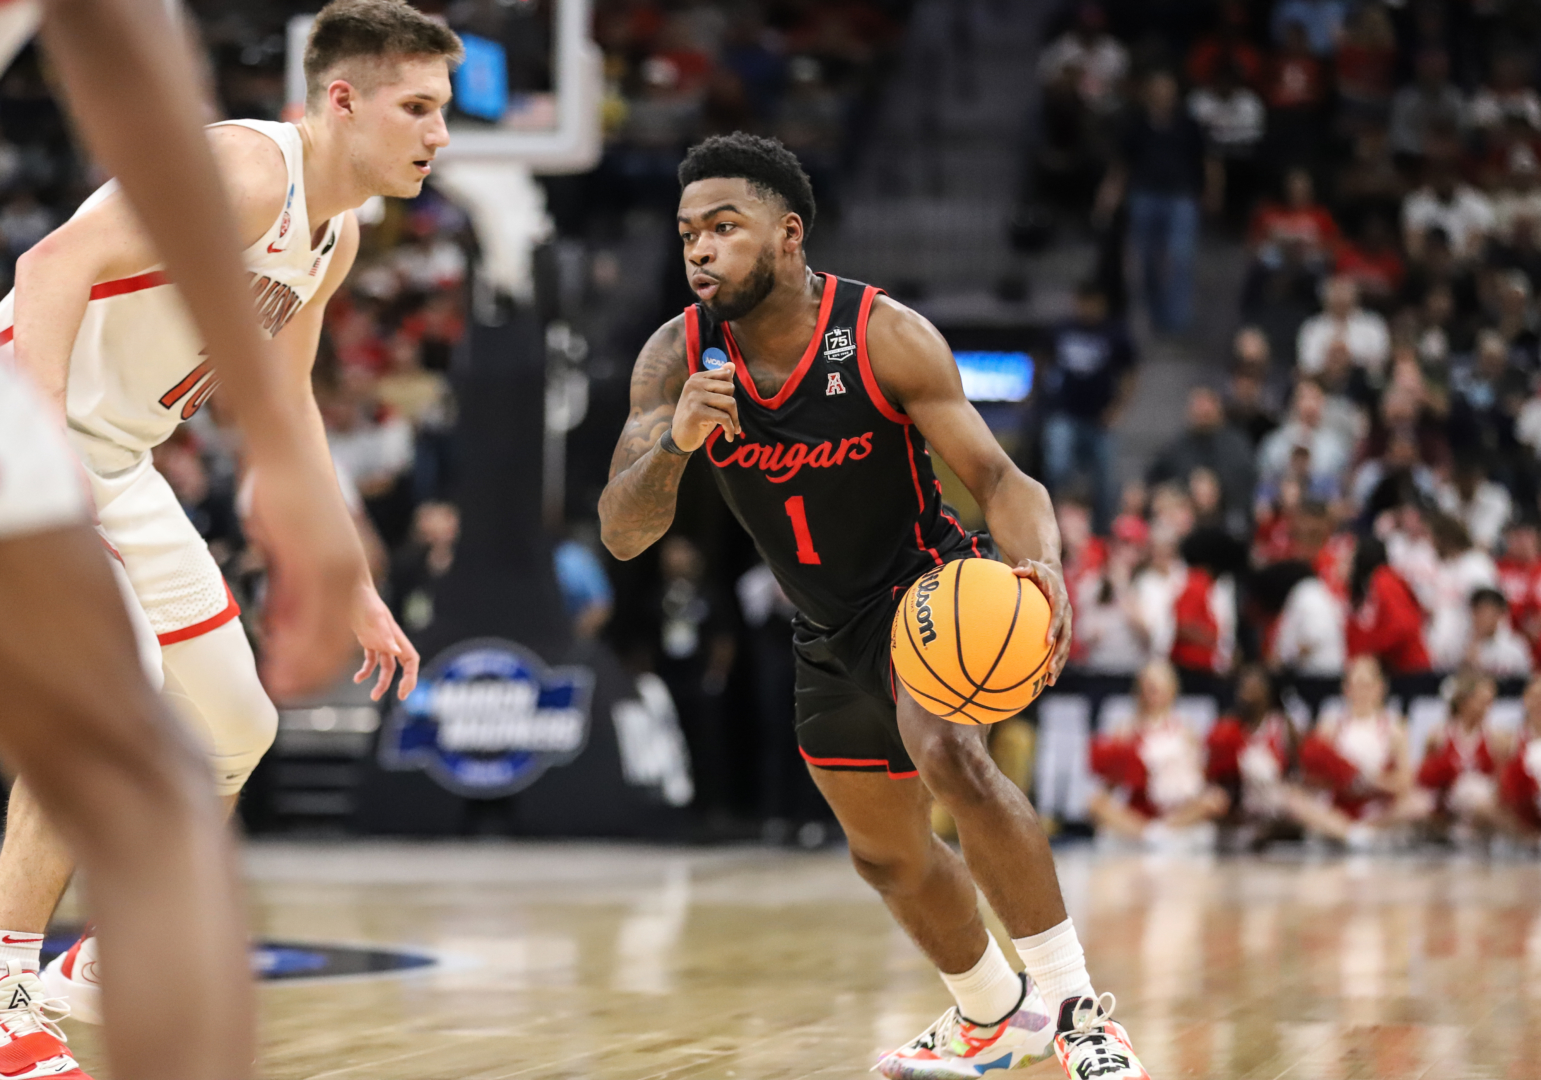 Houston guard Jamal Shead scored a game-high points in the Cougars win over Arizona in the Sweet 16 on Thursday night. | Sean Thomas/The Cougar